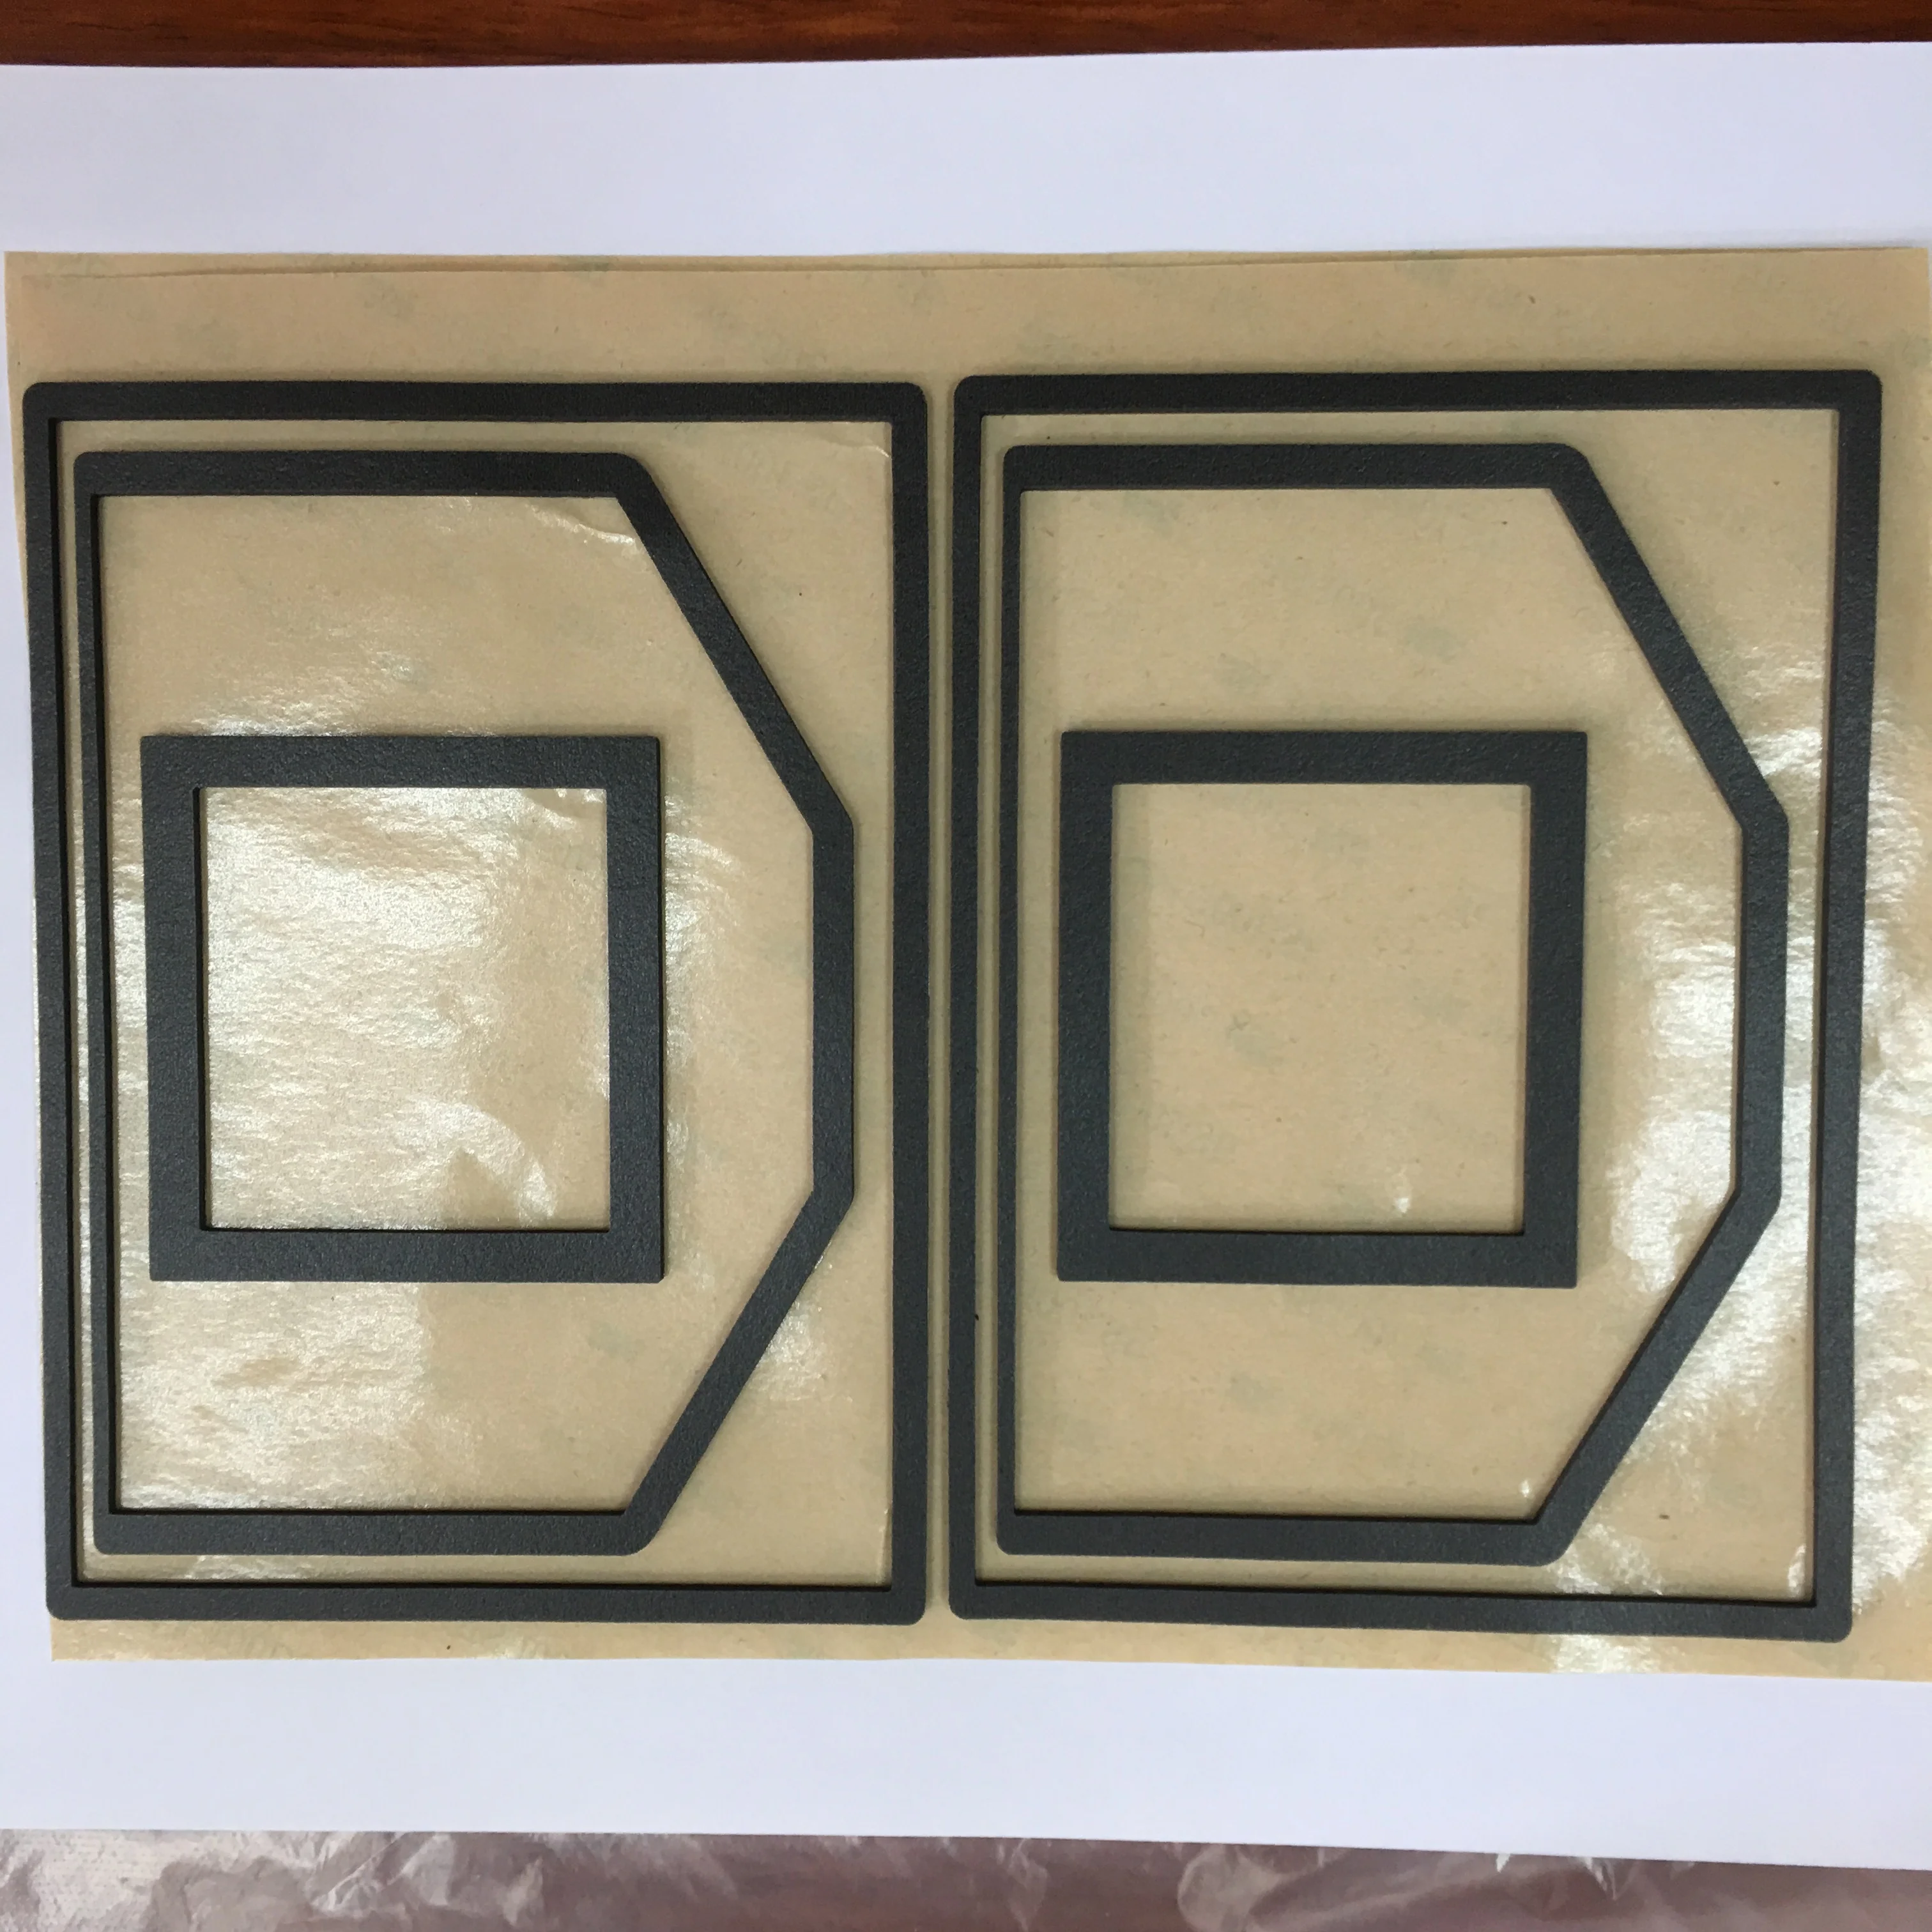 Customized Rectangular Rubber Seal Gasket, Square EPDM Rubber Gasket, Food Grade Silicone Gasket (1600270184163)